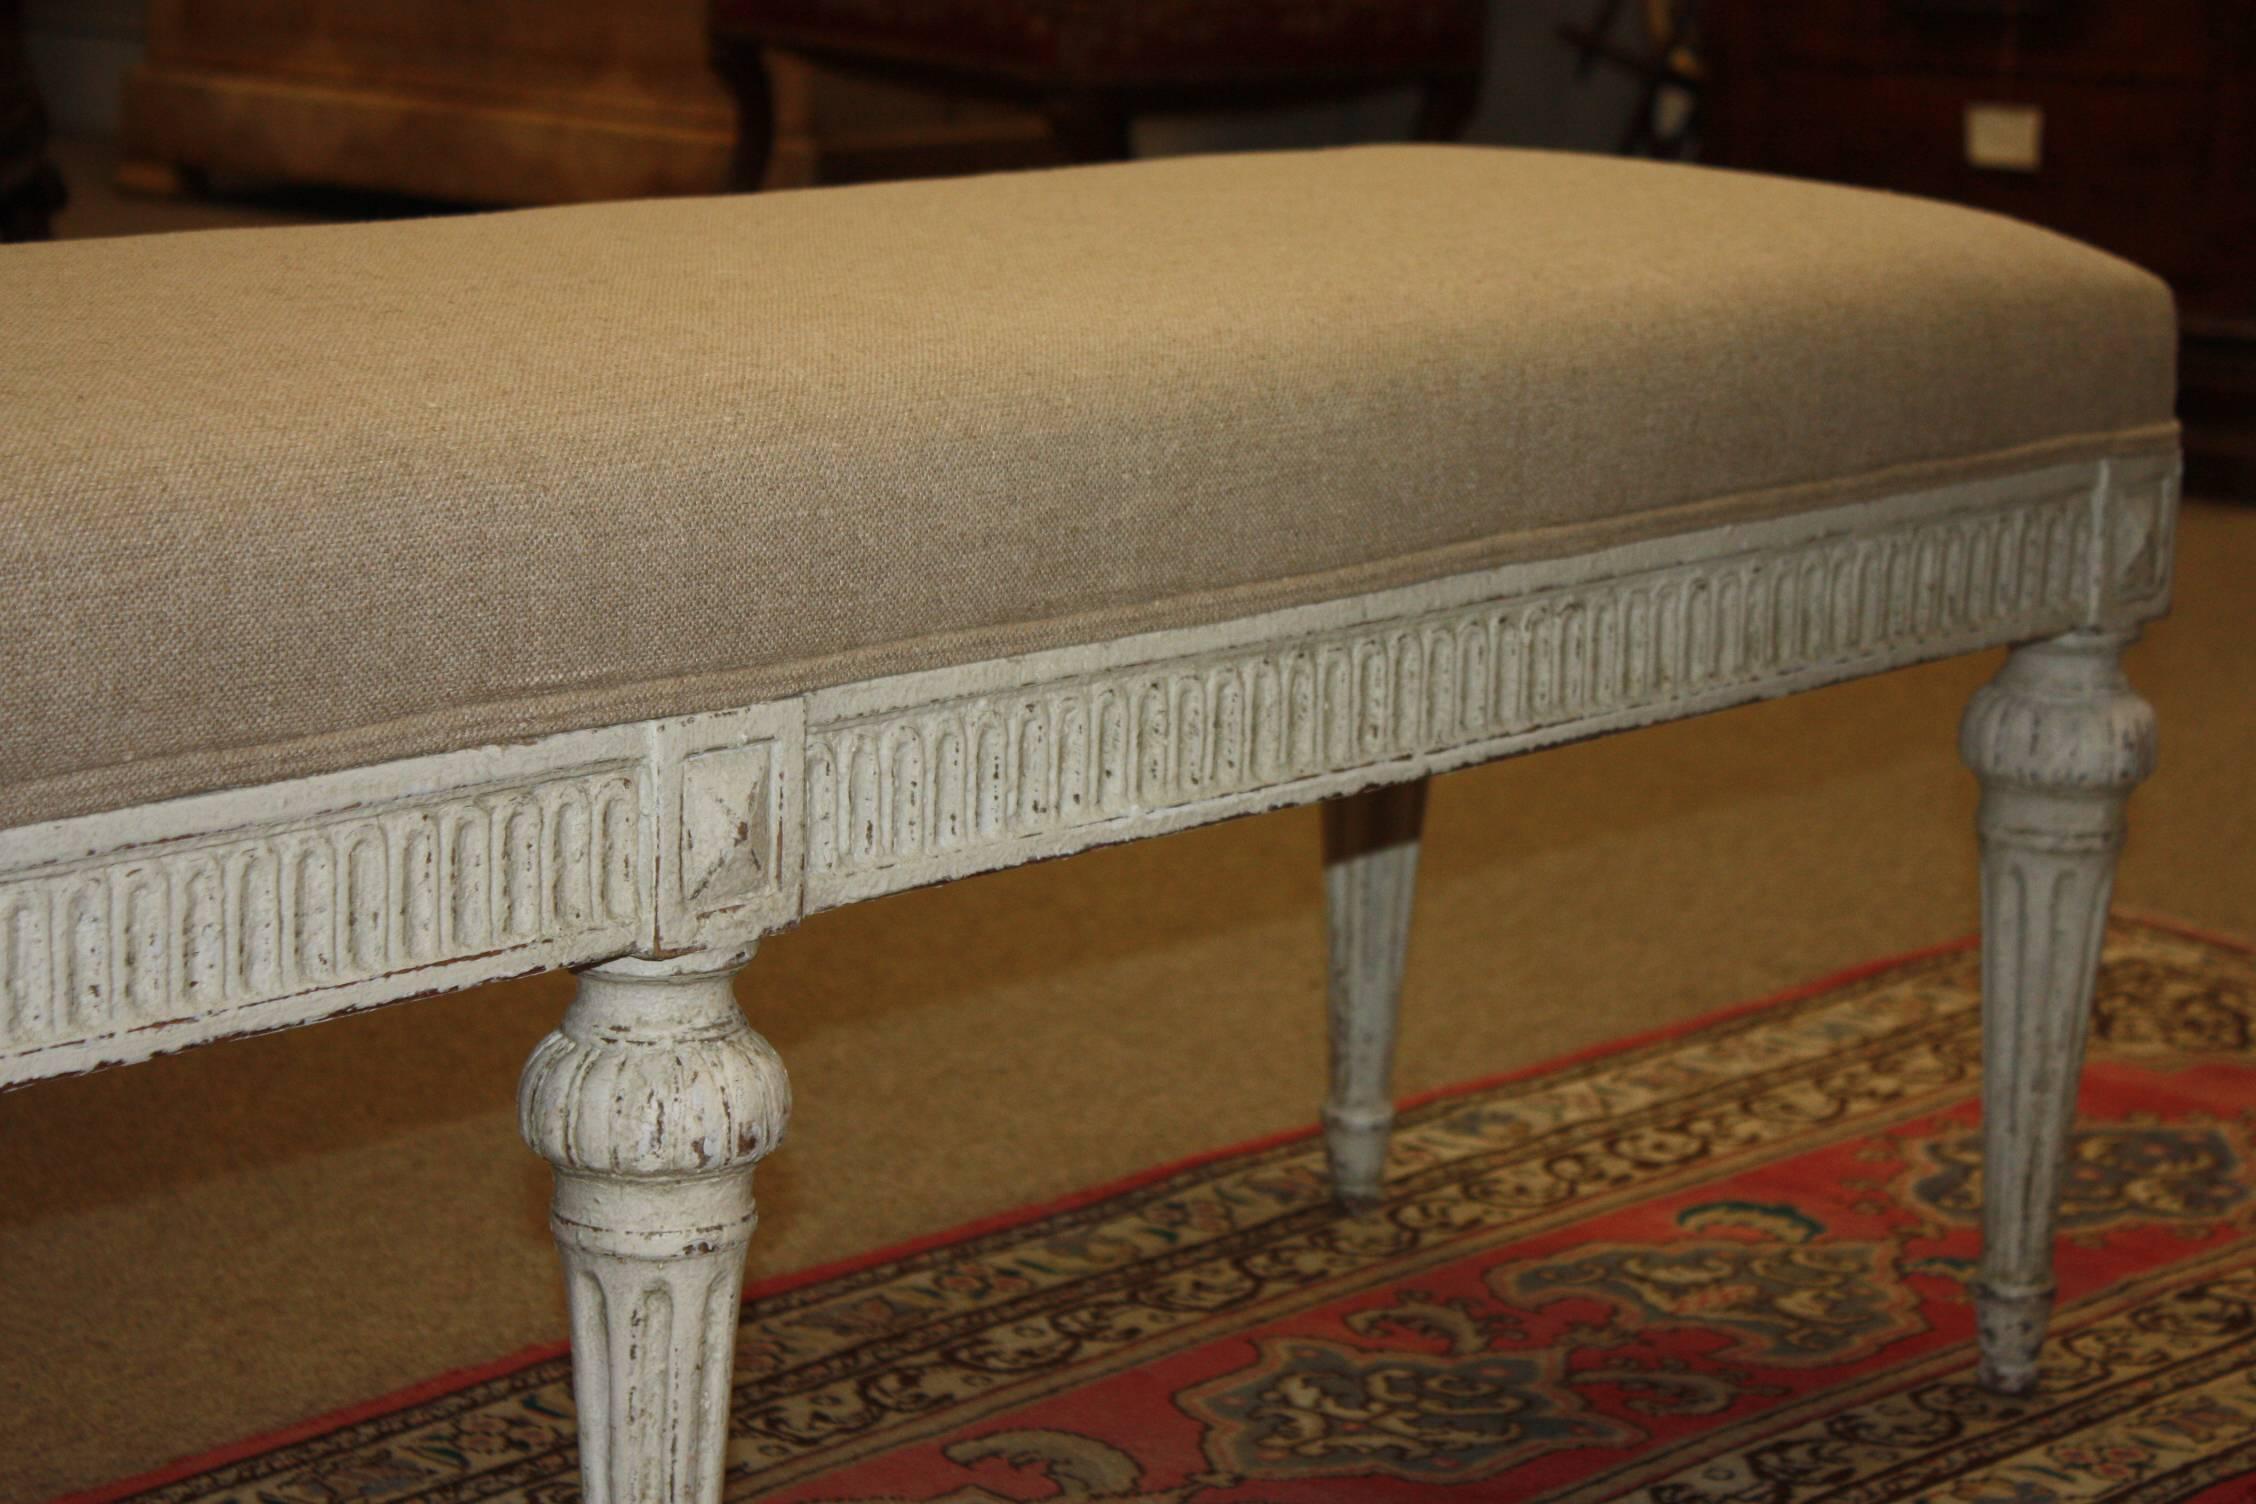 Louis XVI bench from France. Carved, circa 1880, the antique bench has six tapered legs, symmetrical carvings around the apron, and is reupholstered in a neutral. Due to its size and narrow profile, the bench would also make the perfect piece at the